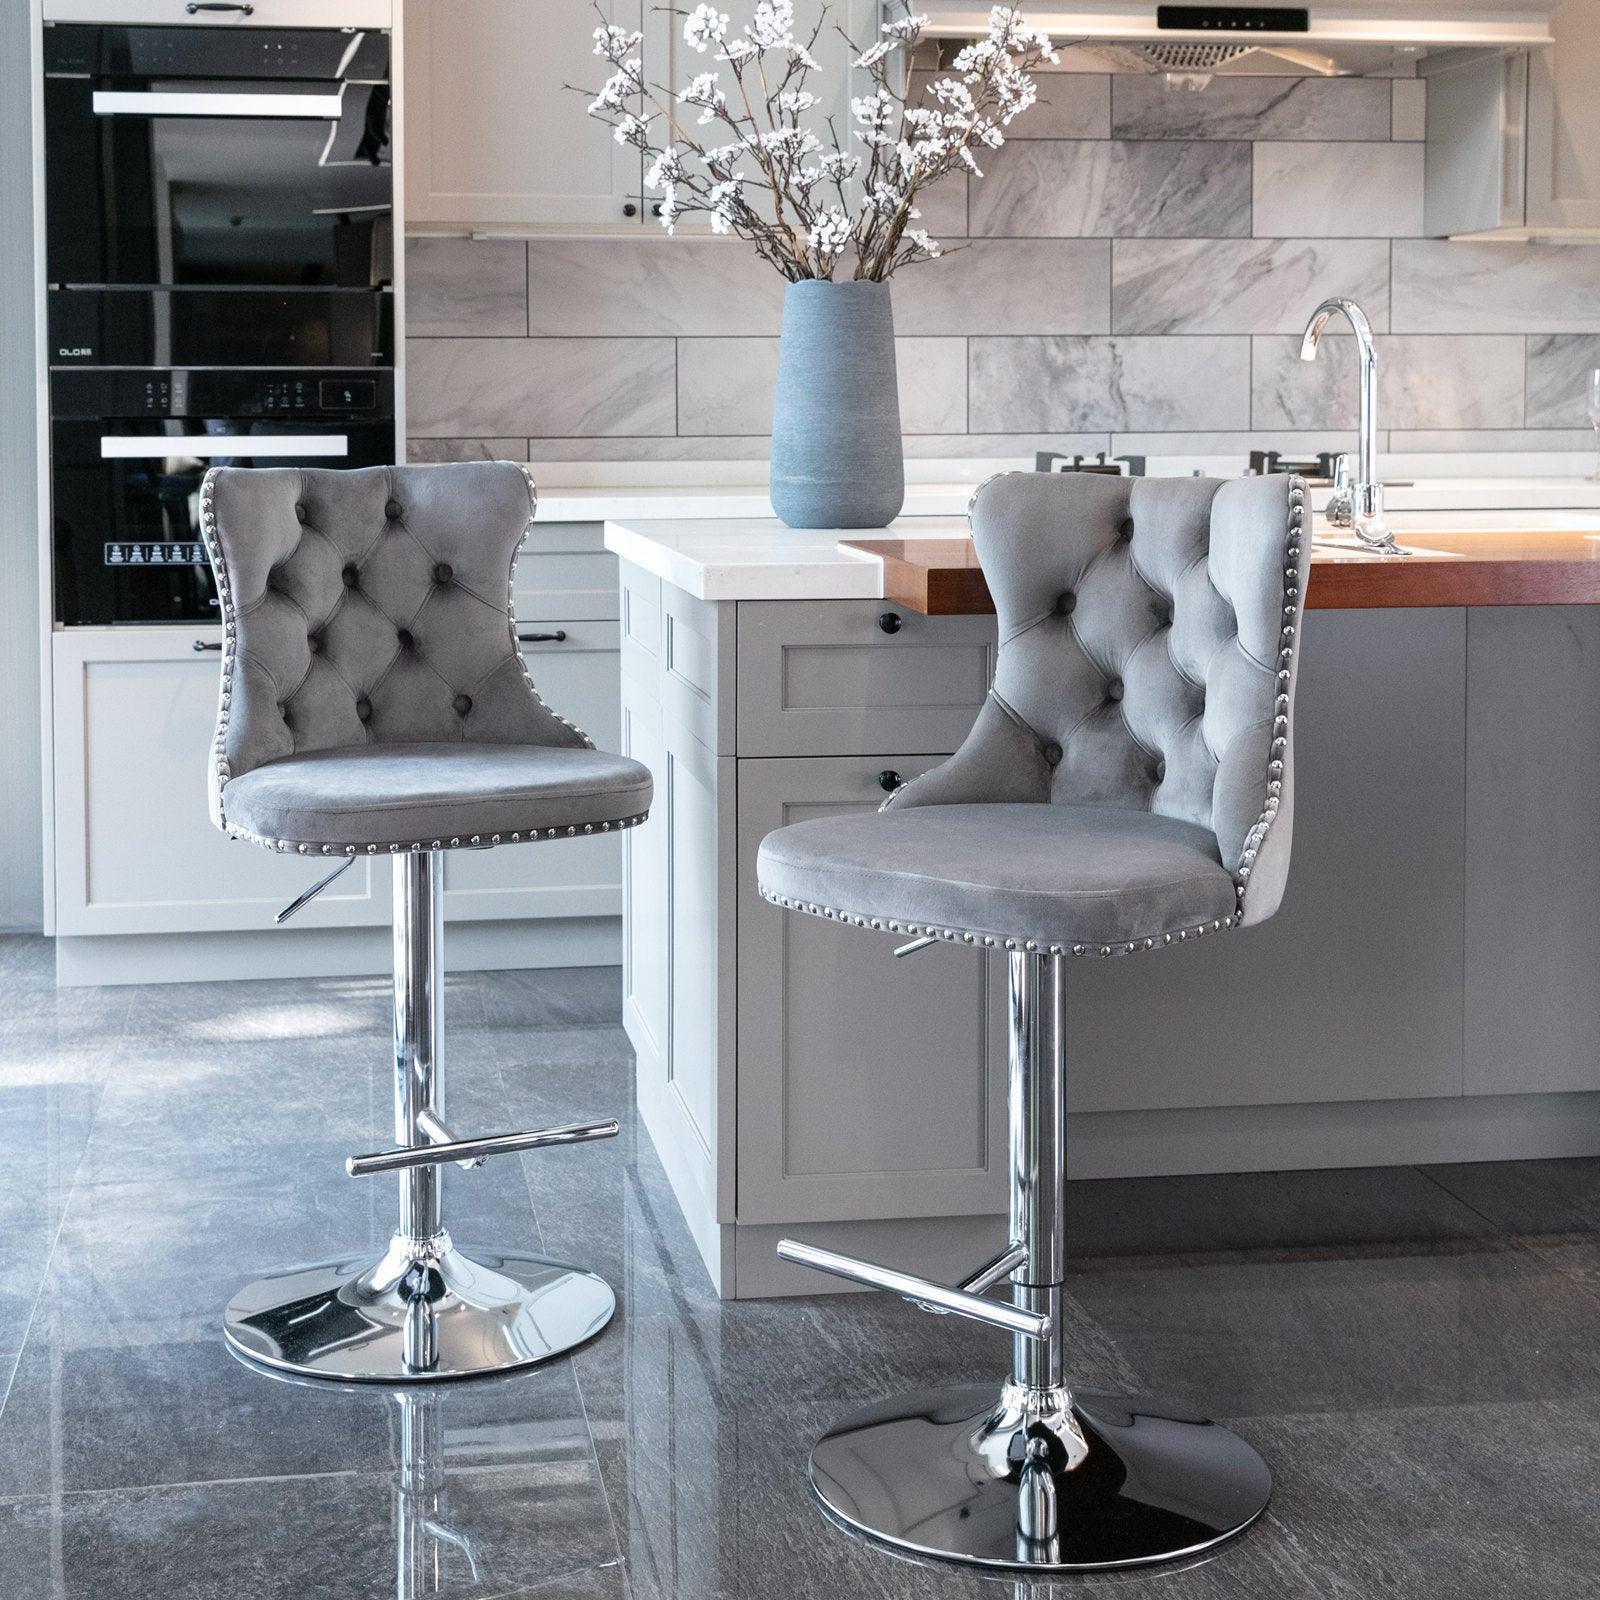 🆓🚛 Swivel Velvet Barstools Adjusatble Seat Height From 25-33 Inch, Modern Upholstered Chrome Base Bar Stools With Backs Comfortable Tufted for Home Pub & Kitchen Island（Gray, Set Of 2）